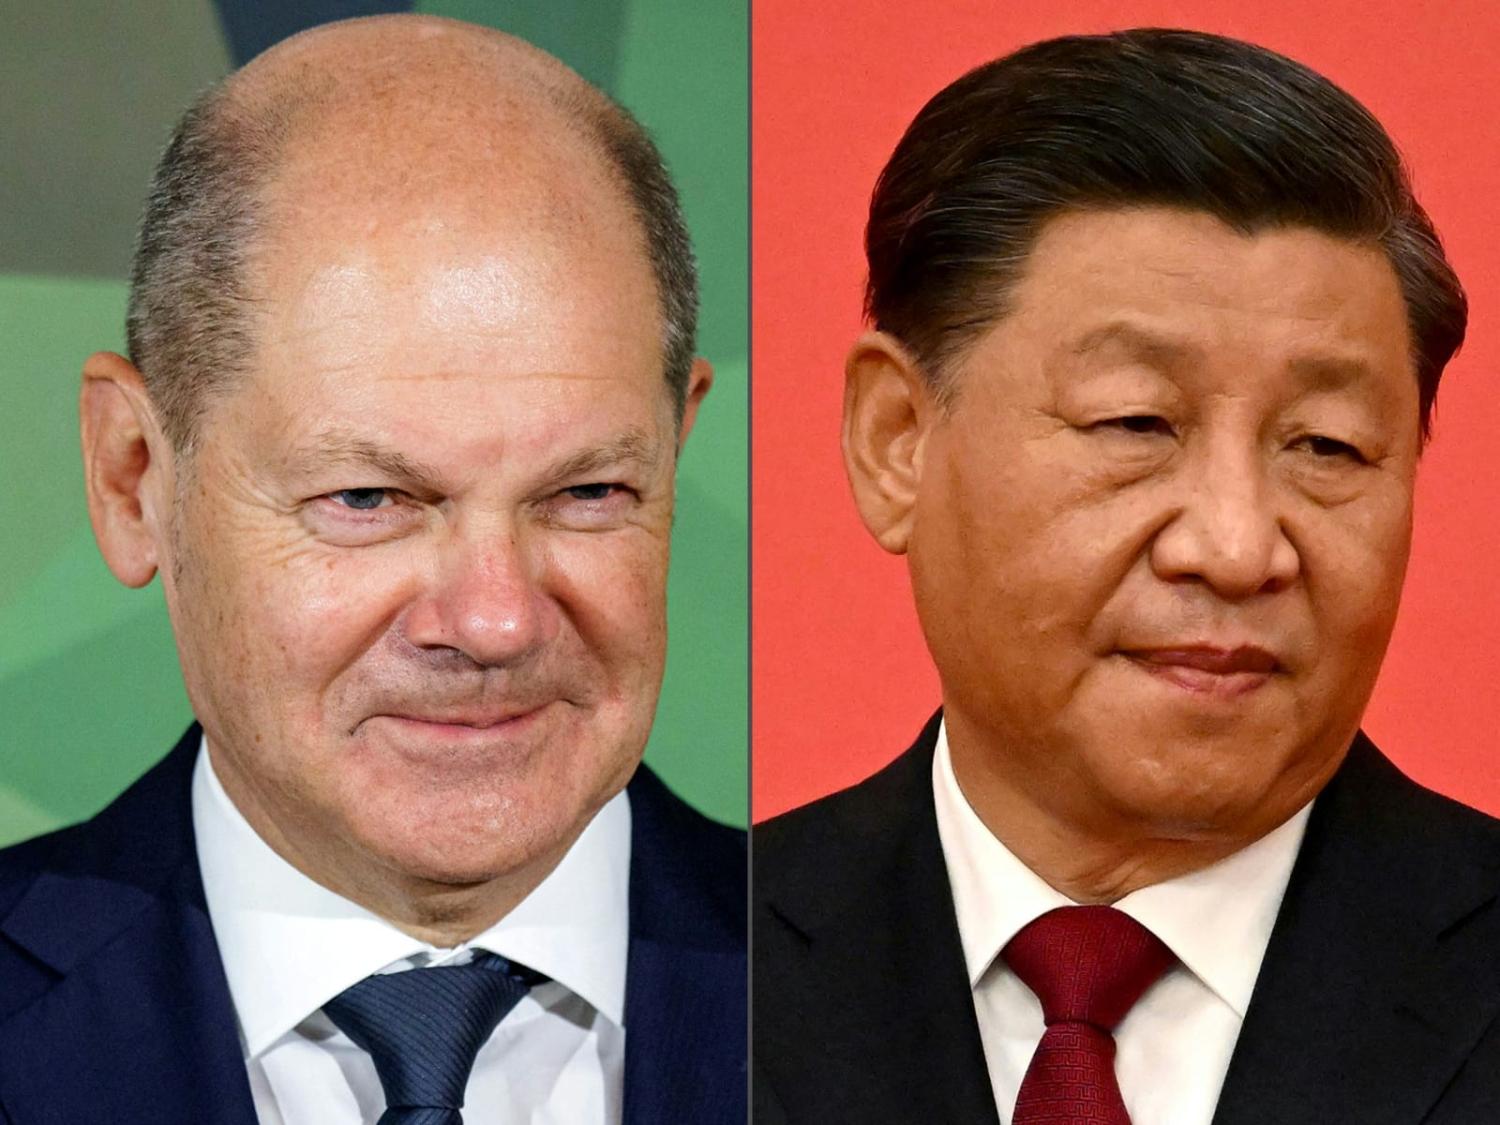 Olaf Scholz will bring in tow the CEOs of some of Germany’s biggest companies during a visit to China where he will also meet Xi Jinping (Jens Schlueter,Noel Celis/AFP via Getty Images)